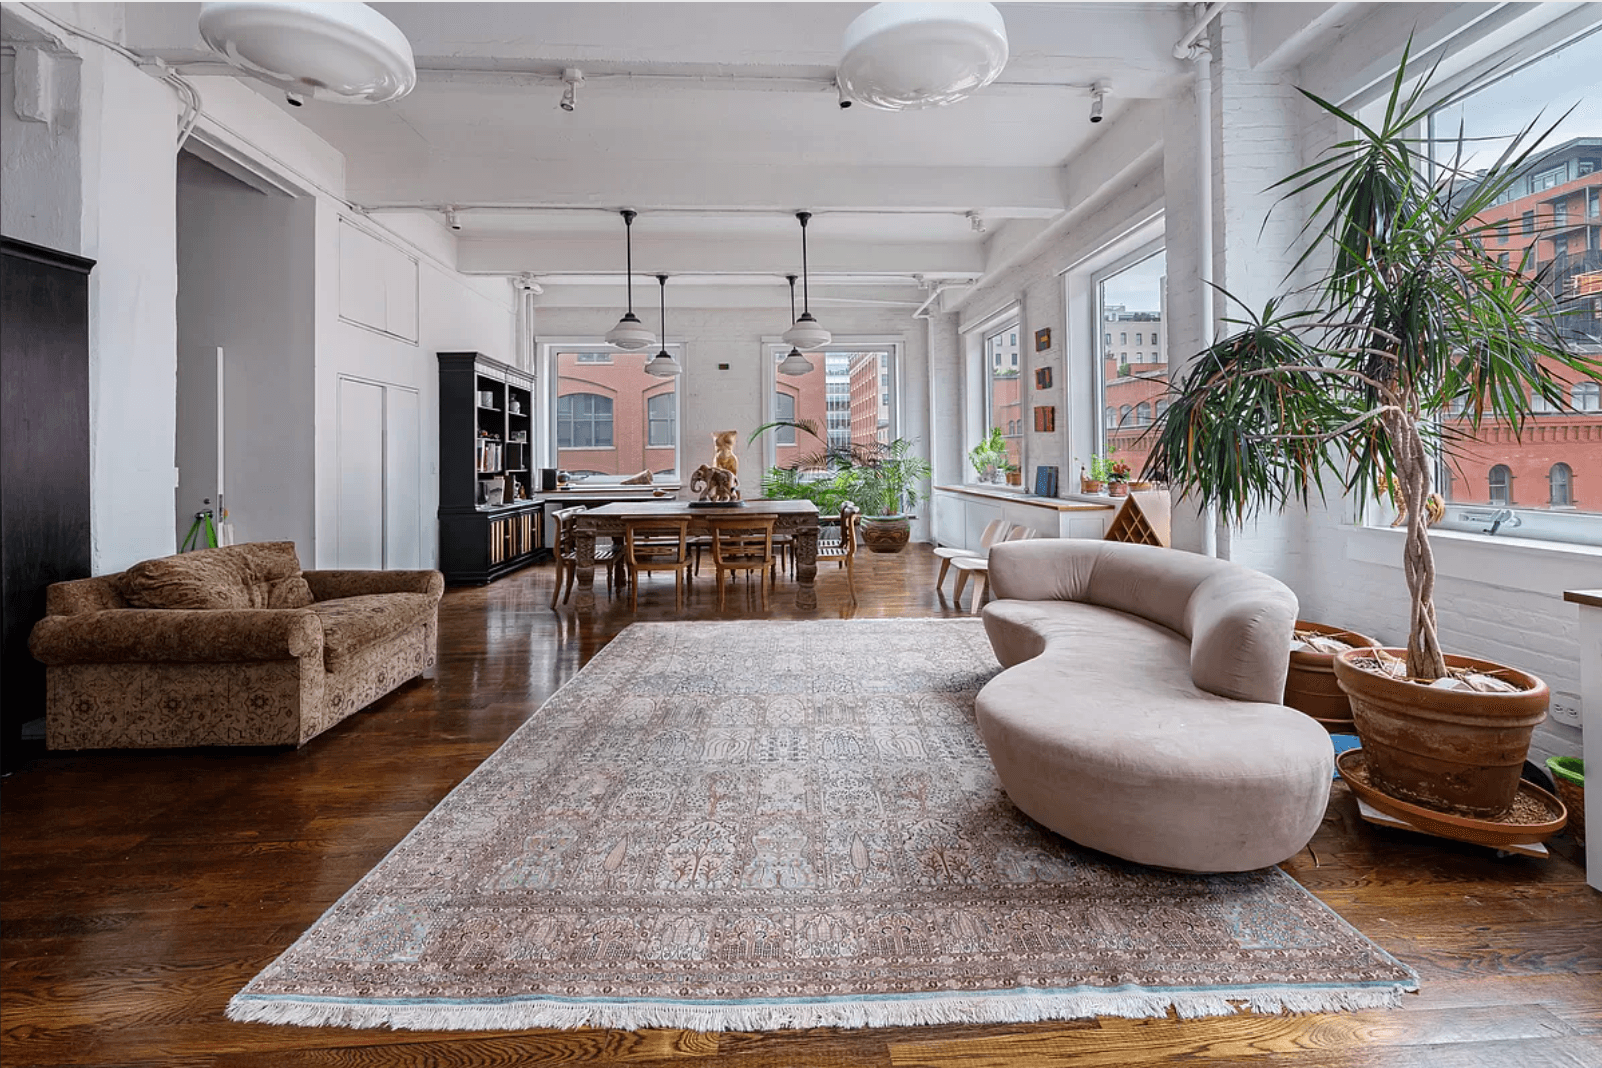 5000 SQ Feet and Full Floor Tribeca Artist Live/Work Loft with Private Elevator Landing